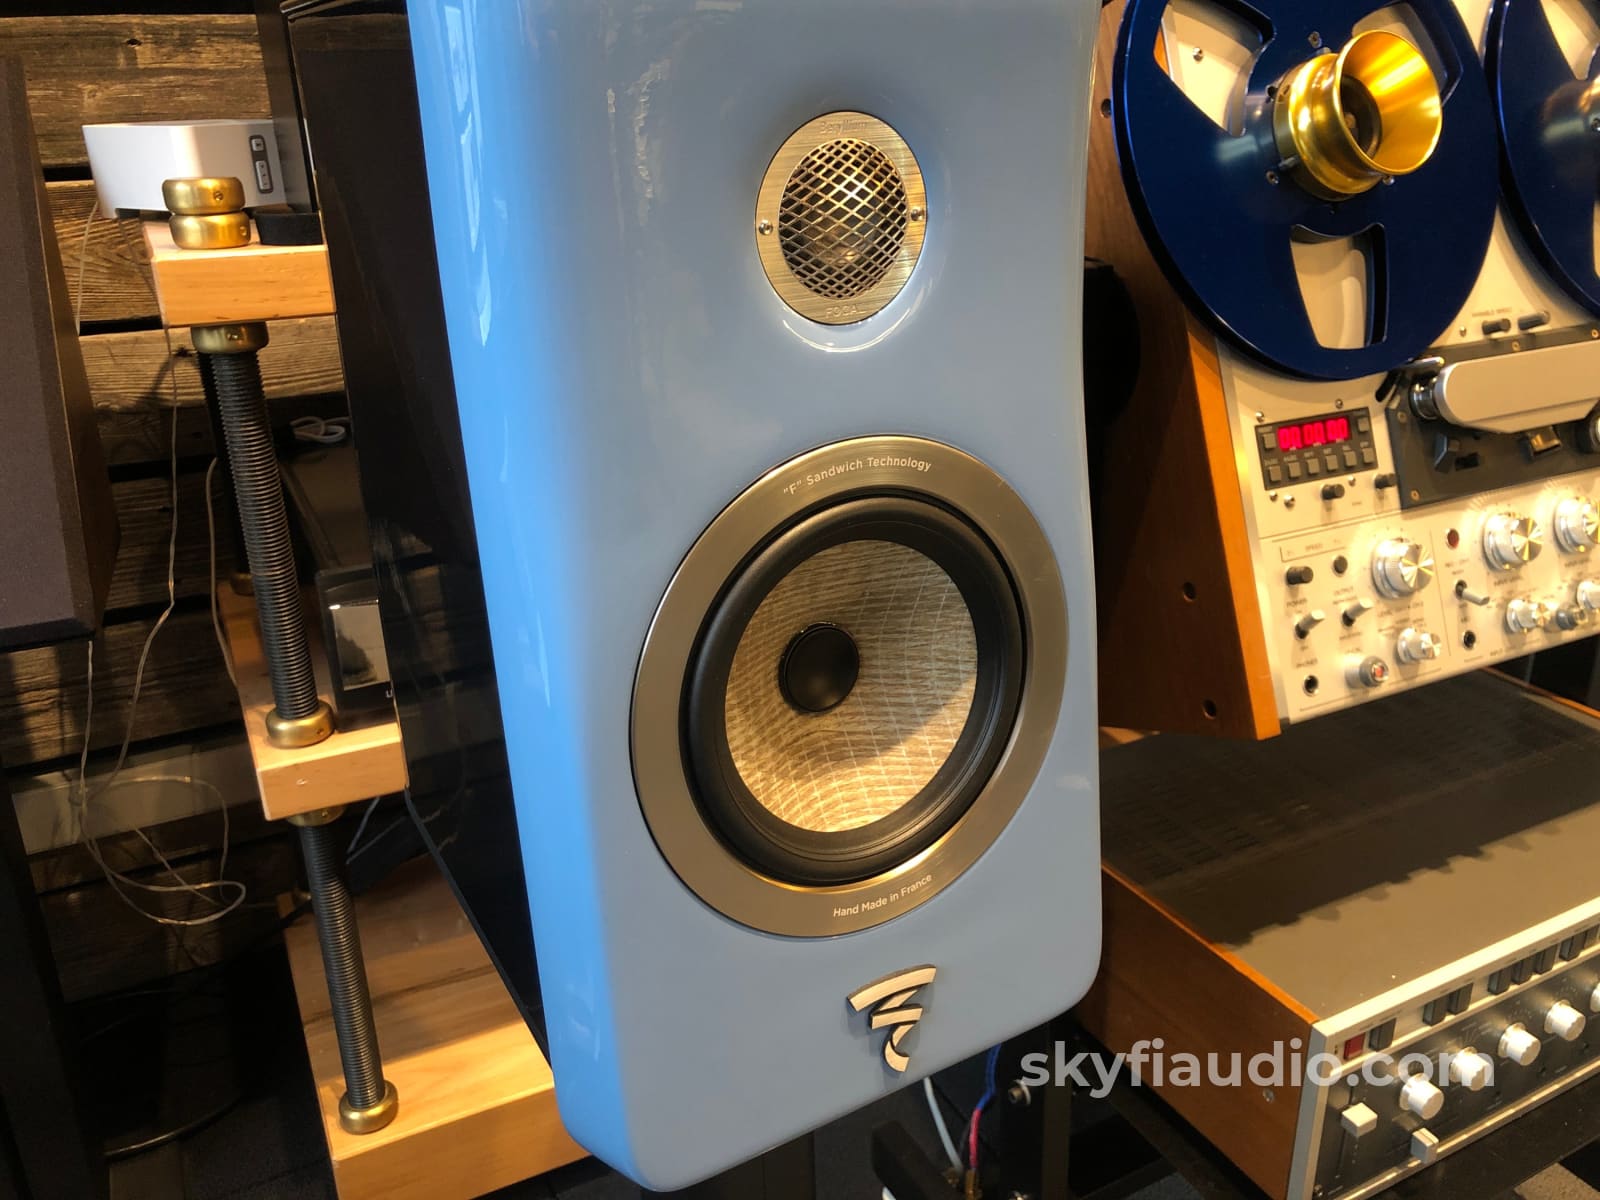 Focal Kanta N°1 High Gloss Speakers With Stands - Rare Gauloise Blue Finish